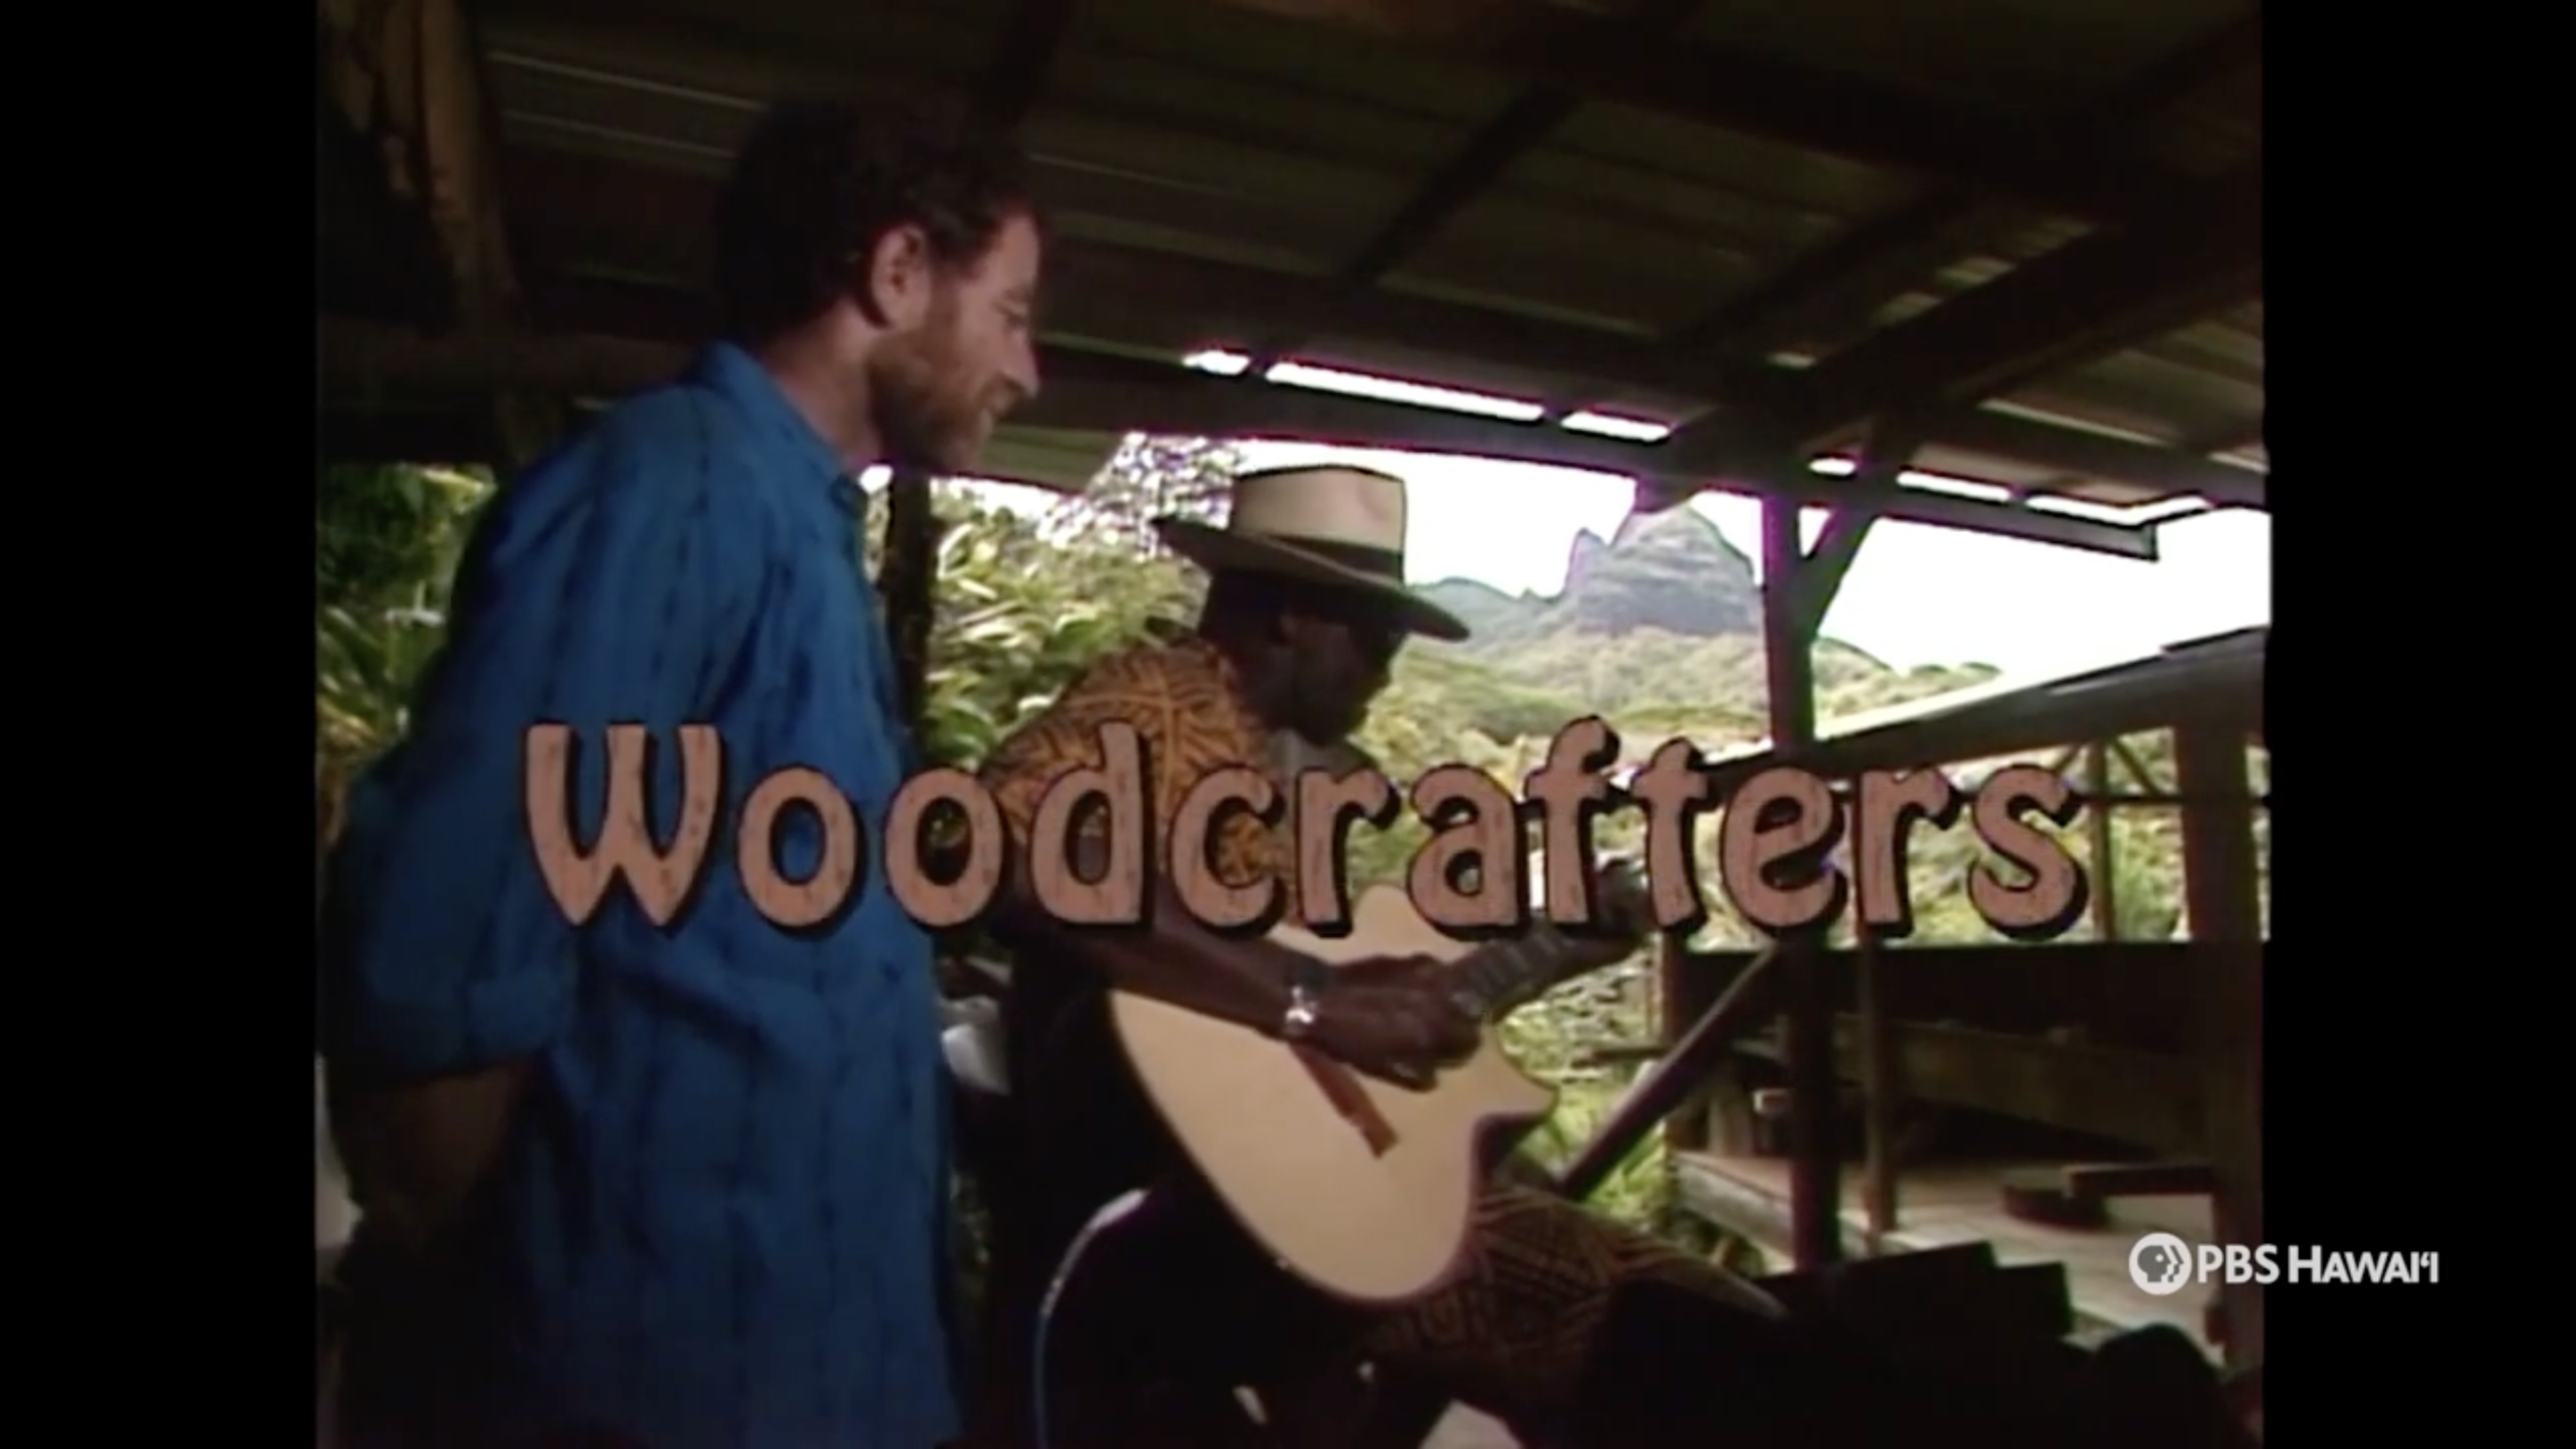 WOODCRAFTERS